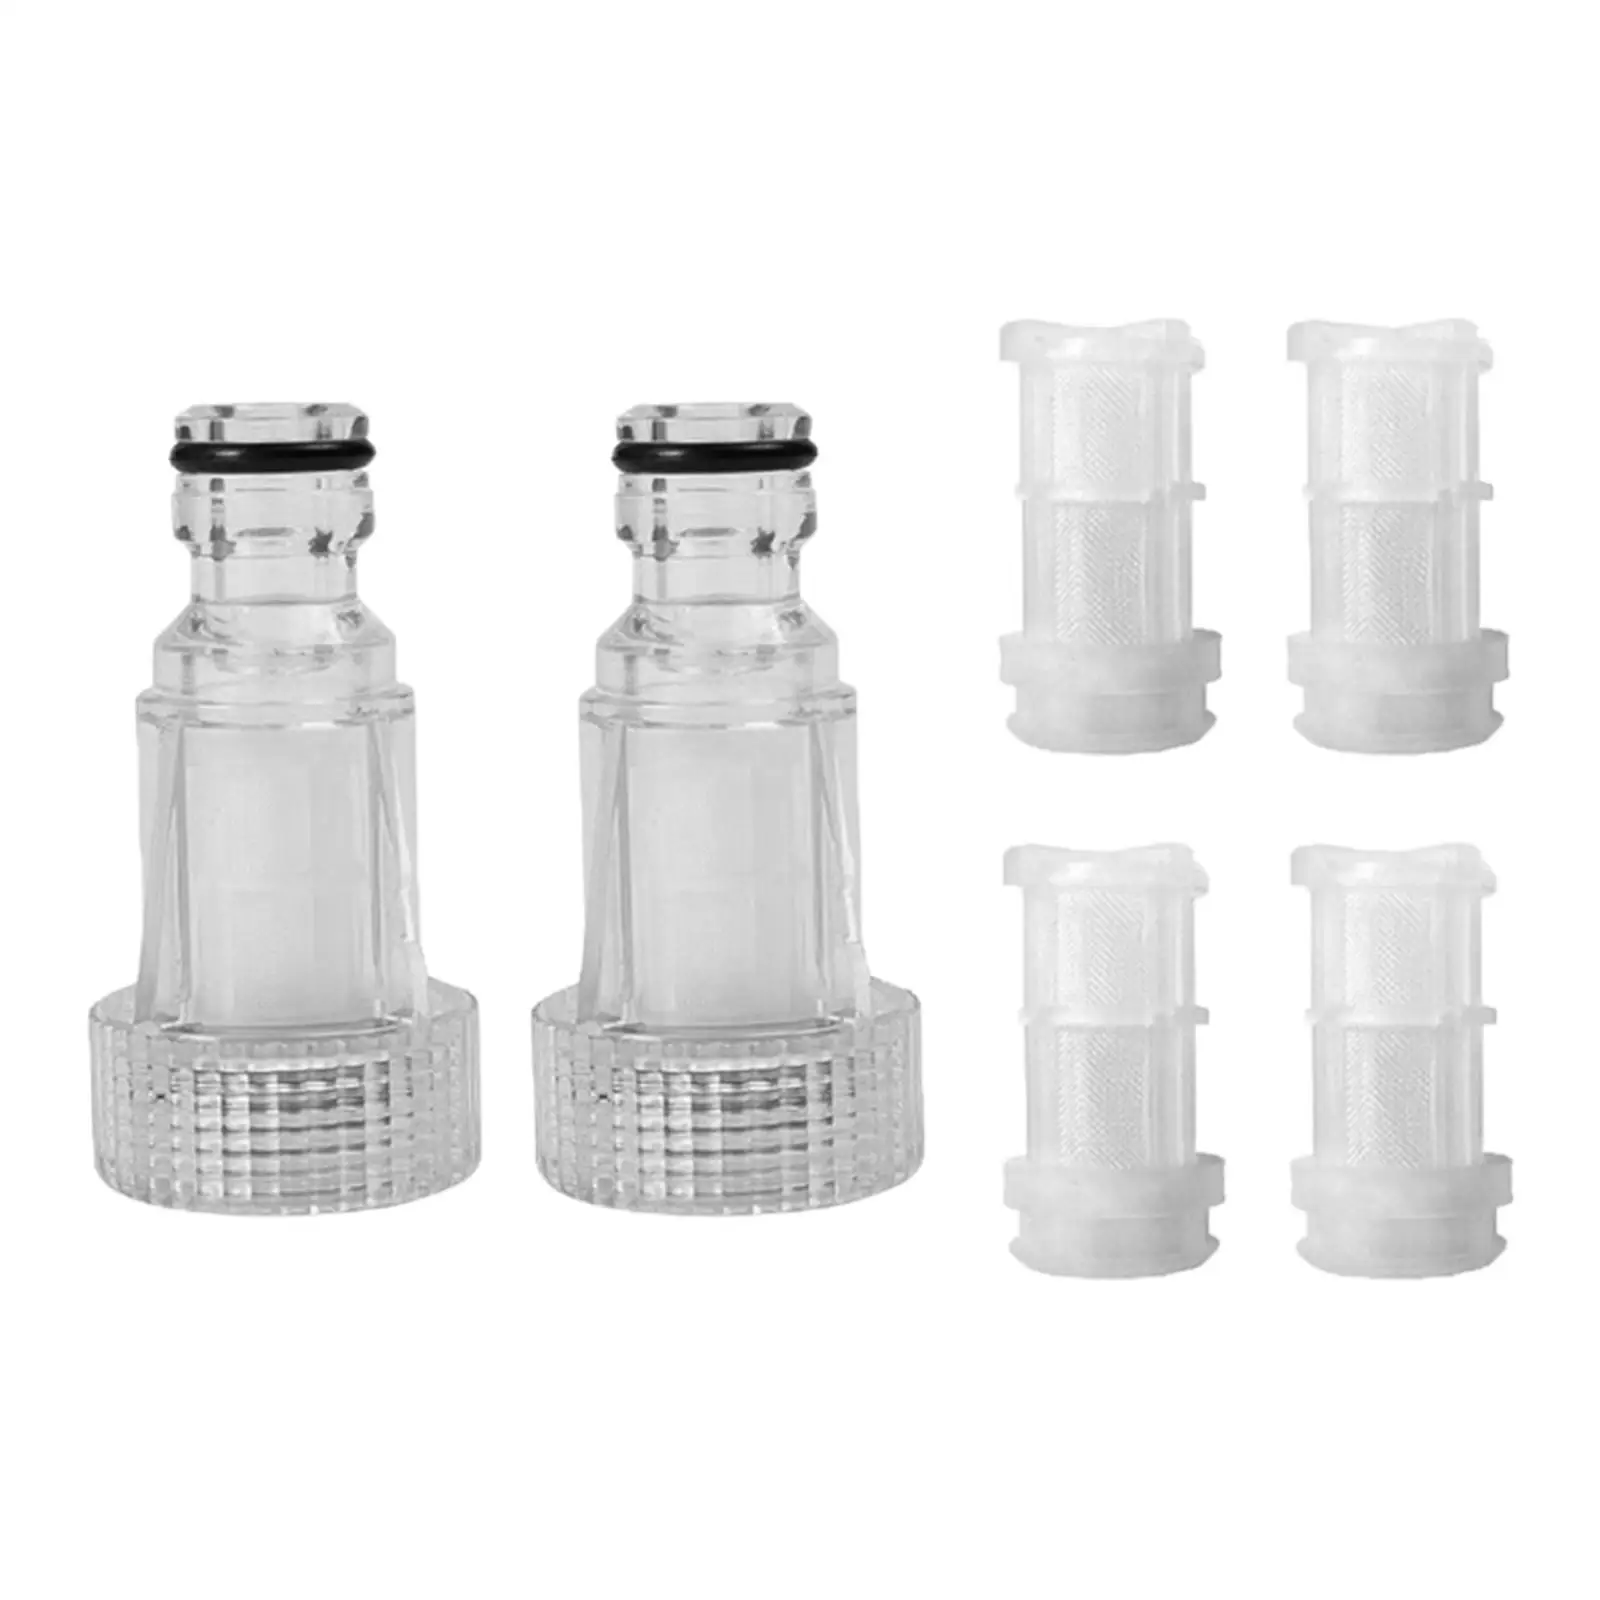 6x Water Connector Filter Hose Pipe Fitting Nozzle Pressure Washer Filters Nets for K2-K7 Series High Pressure Washers Accs